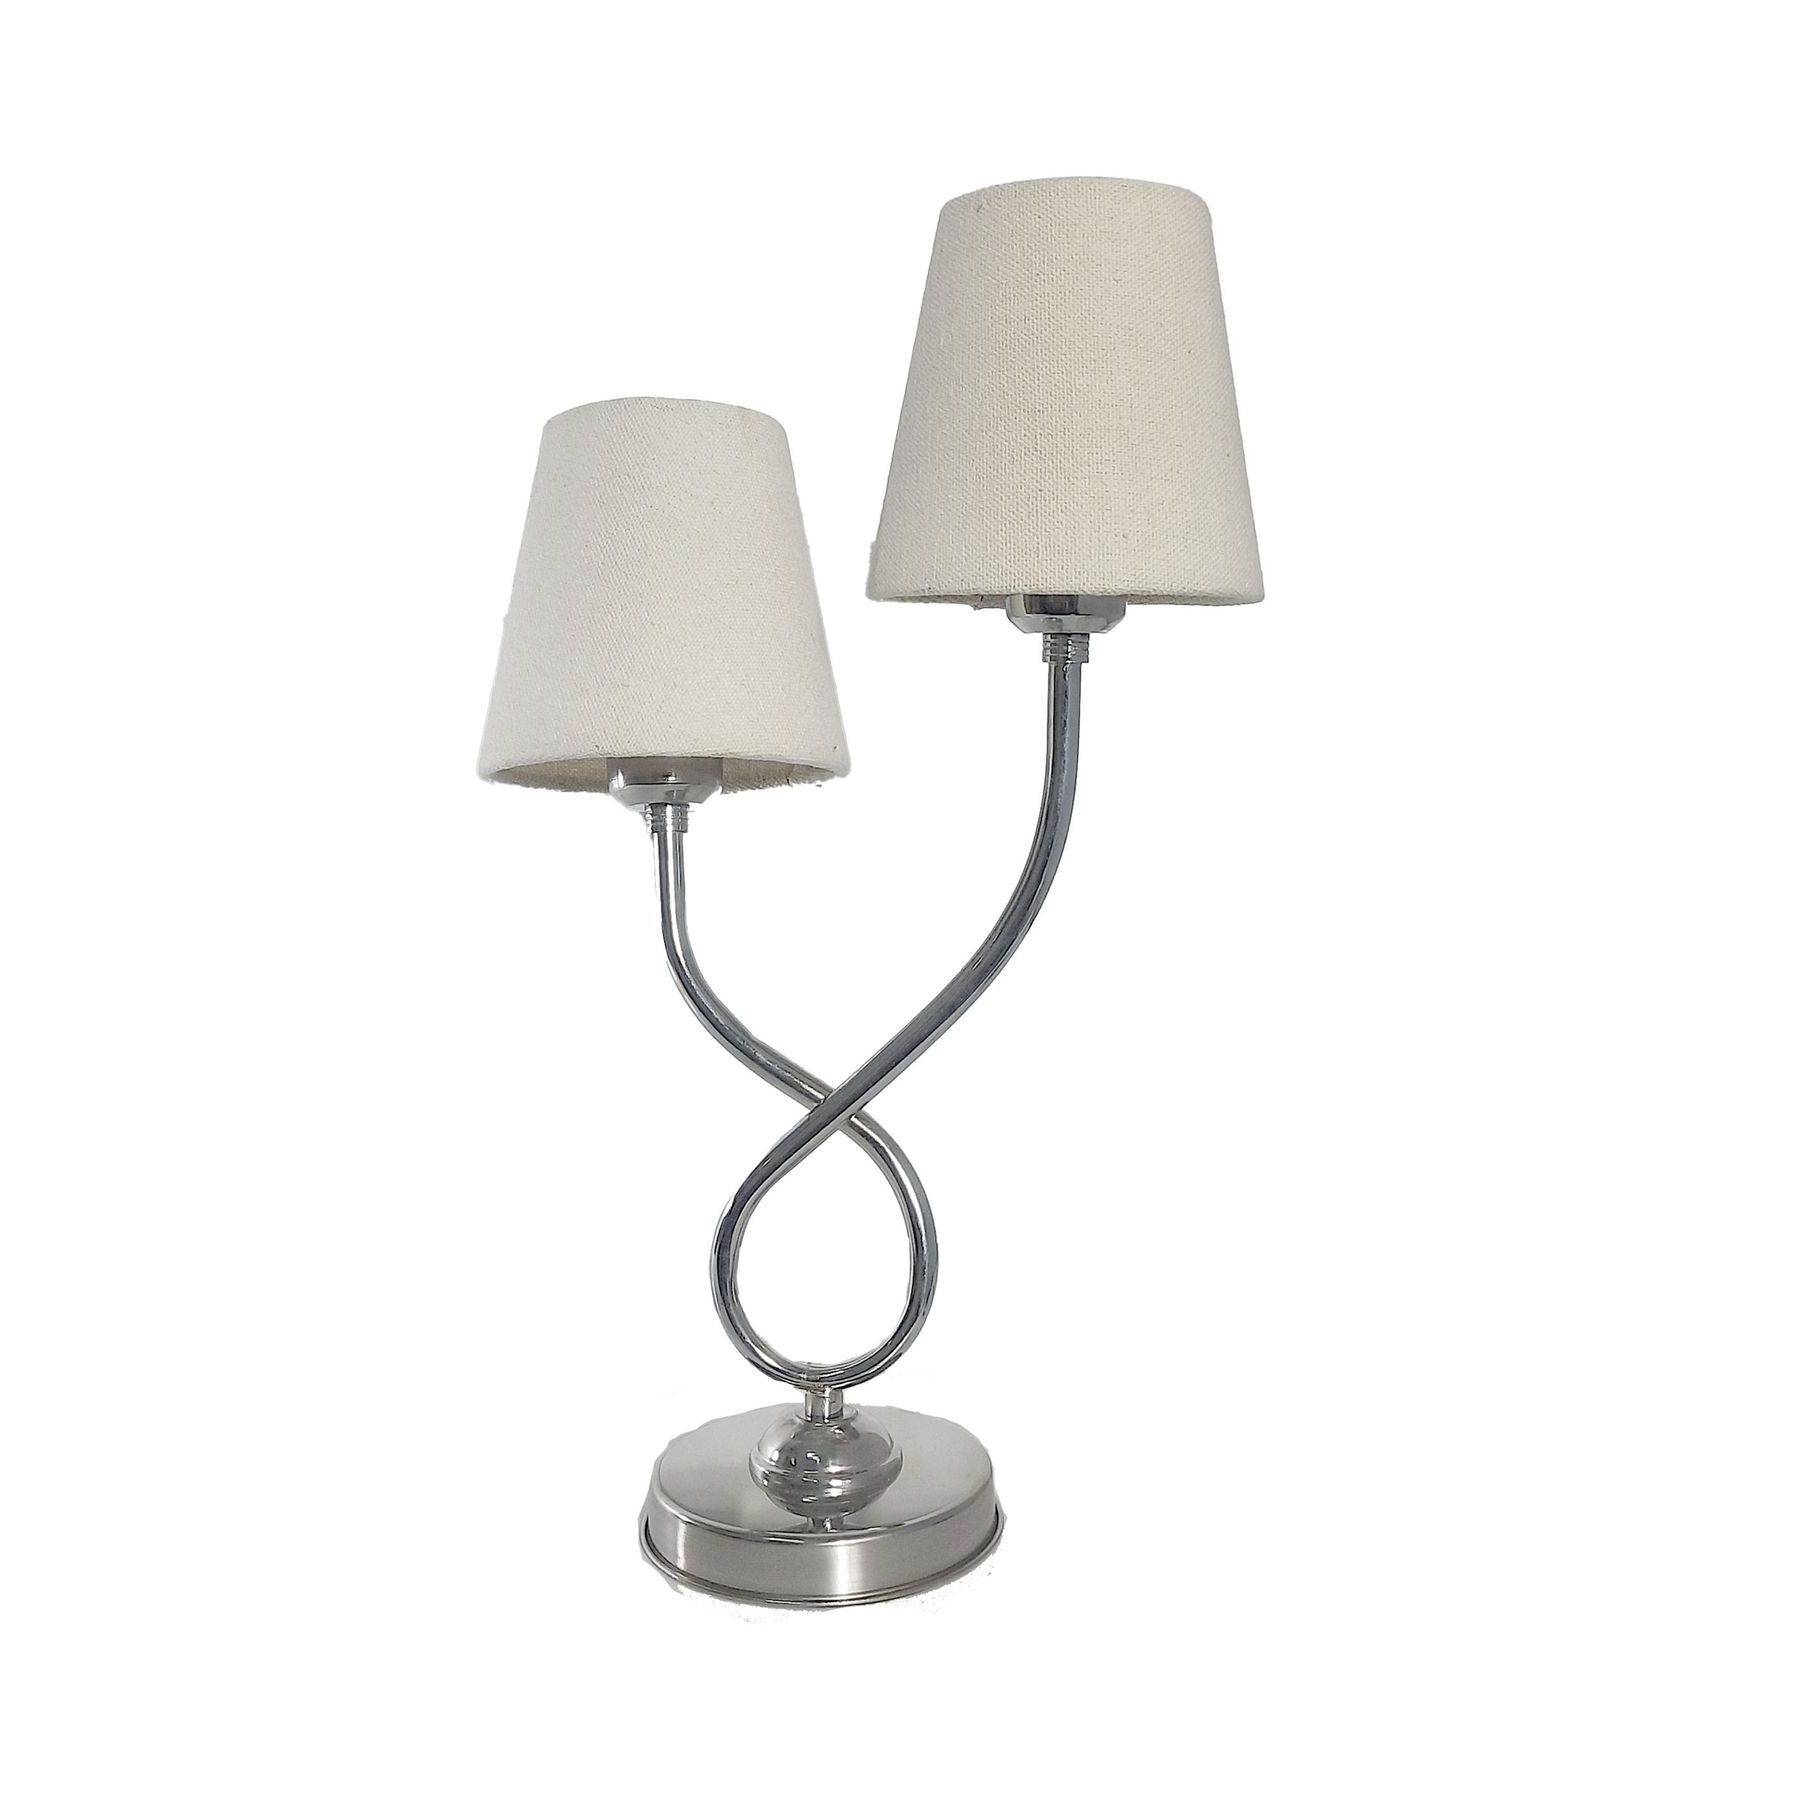 Table Lamp; Desk Lamps; Night Lamp | Home Gallery For 3 Piece Setfloor Lamps (View 17 of 20)